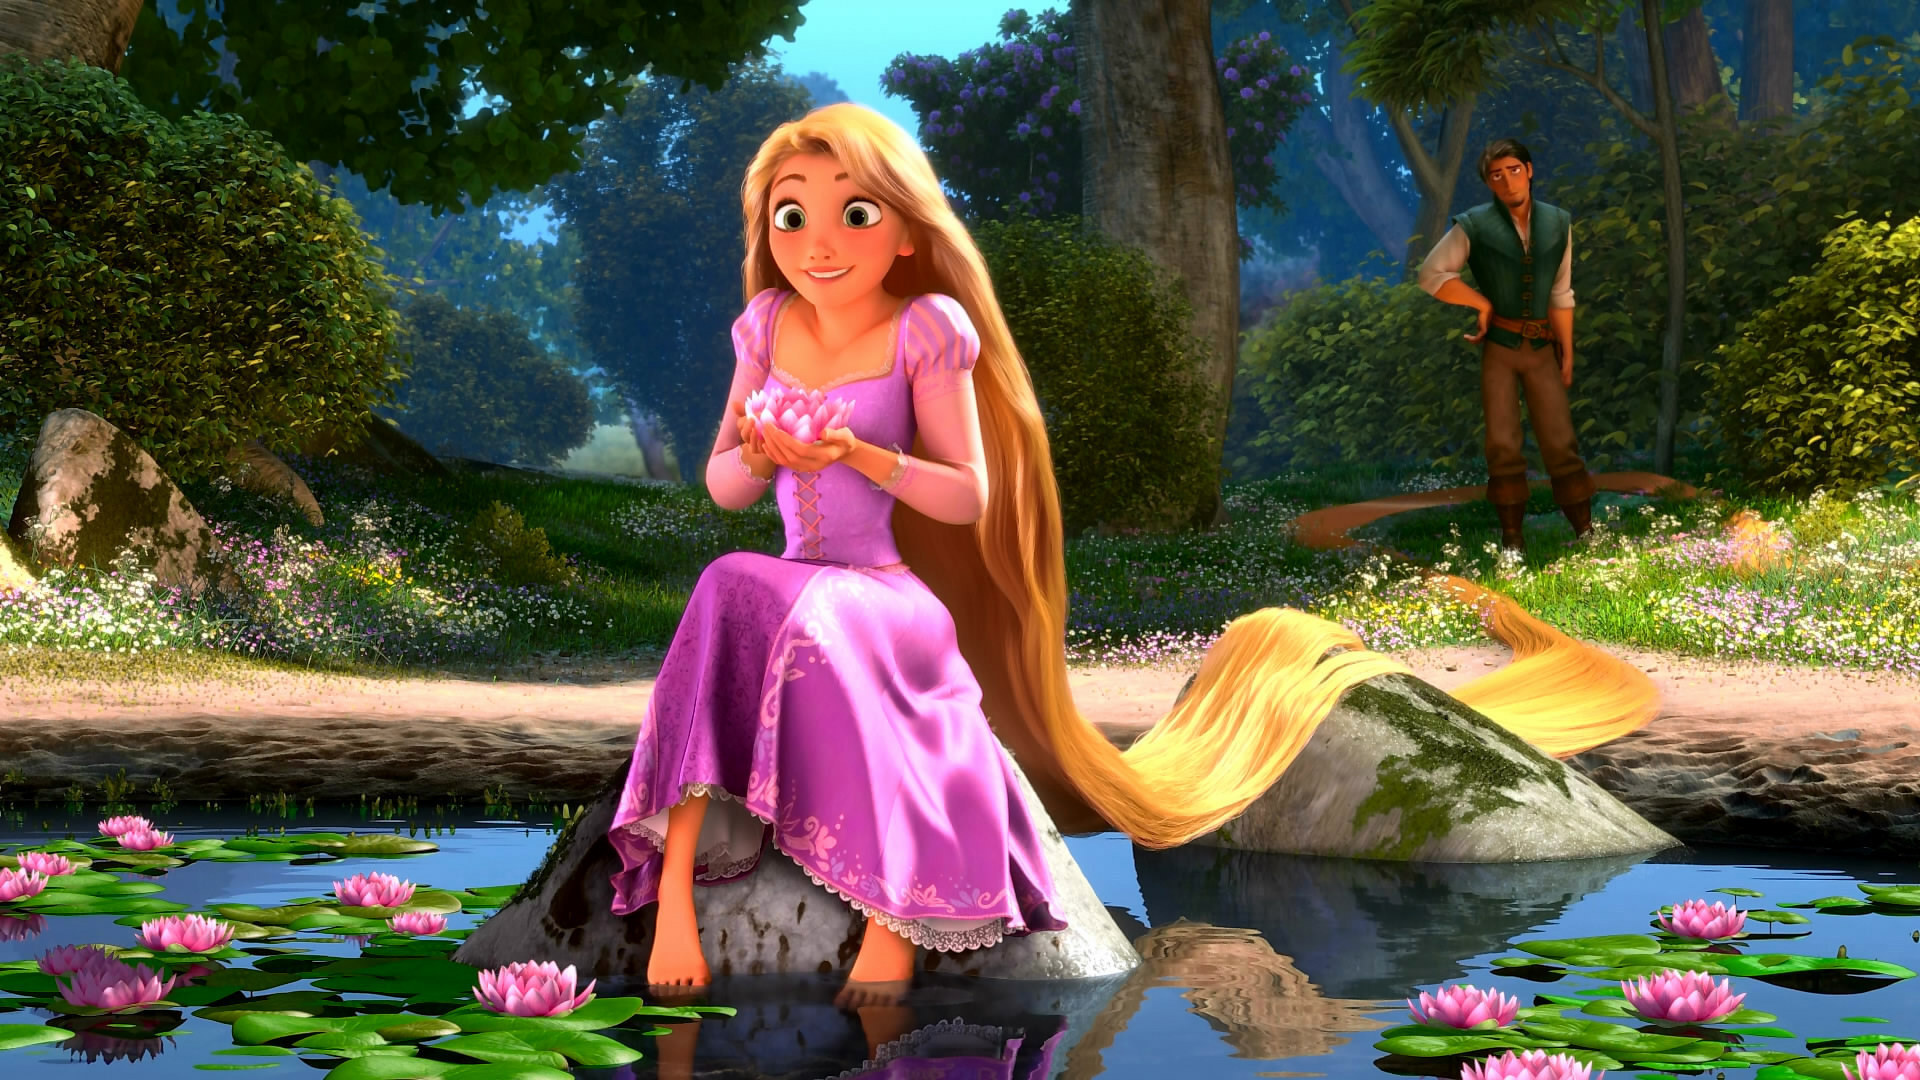 Rapunzel sits on a rock surrounded by lily pads.